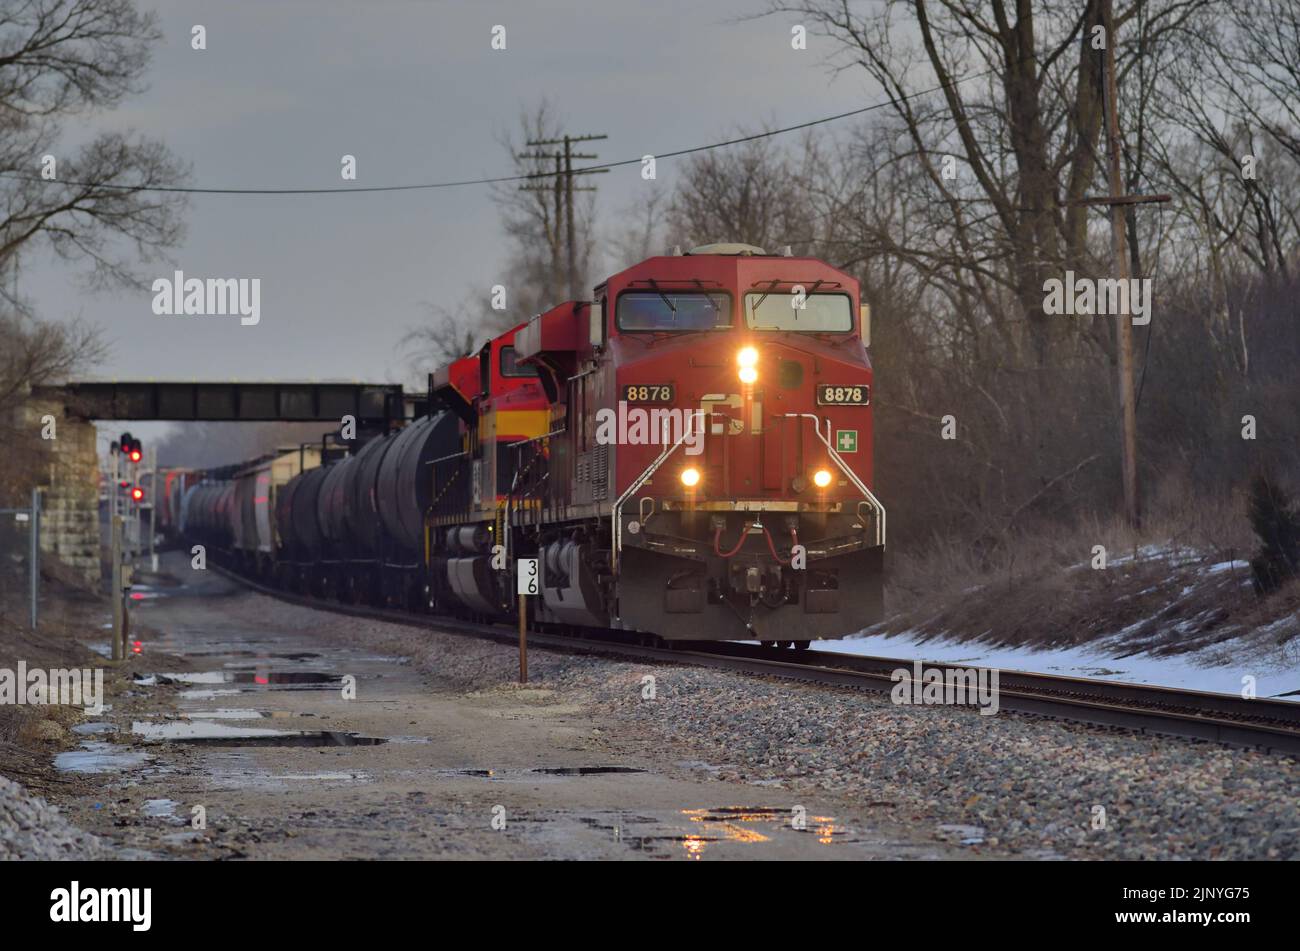 Wayne, Illinois, USA. A pair of locomotives, led by an off-road Canadian Pacific Railway unit, power a Canadian National Railway freight train. Stock Photo